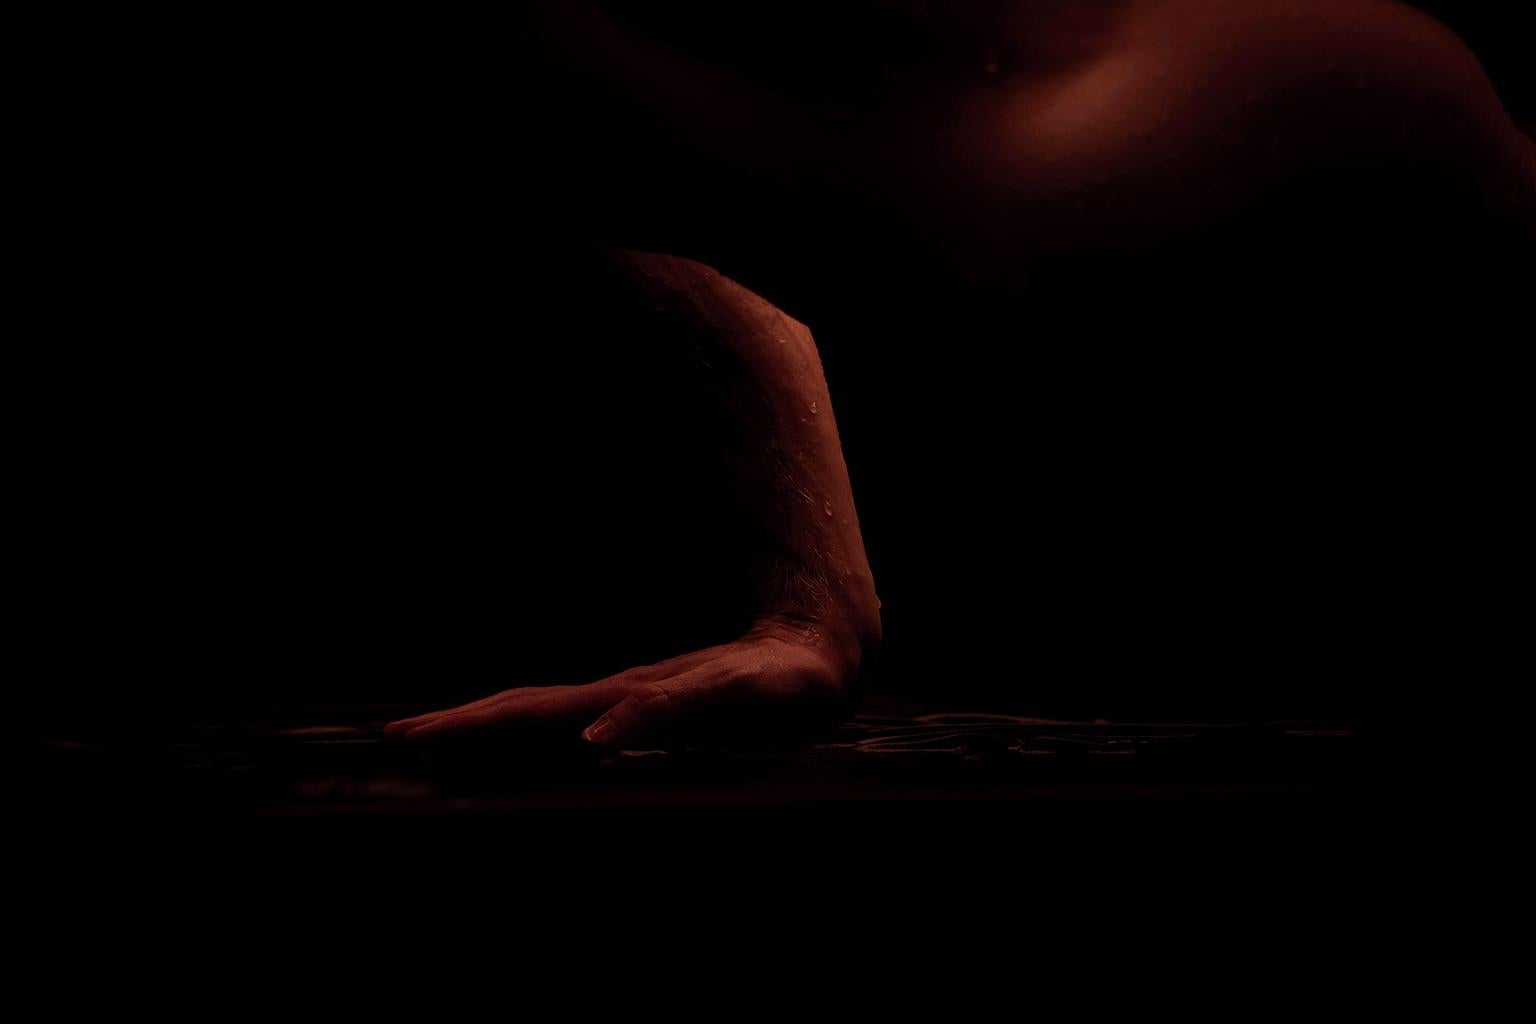 Ricky Cohete Nude Photograph - Latidos. Momentum, series. Male Nude Limited Edition Color Photograph